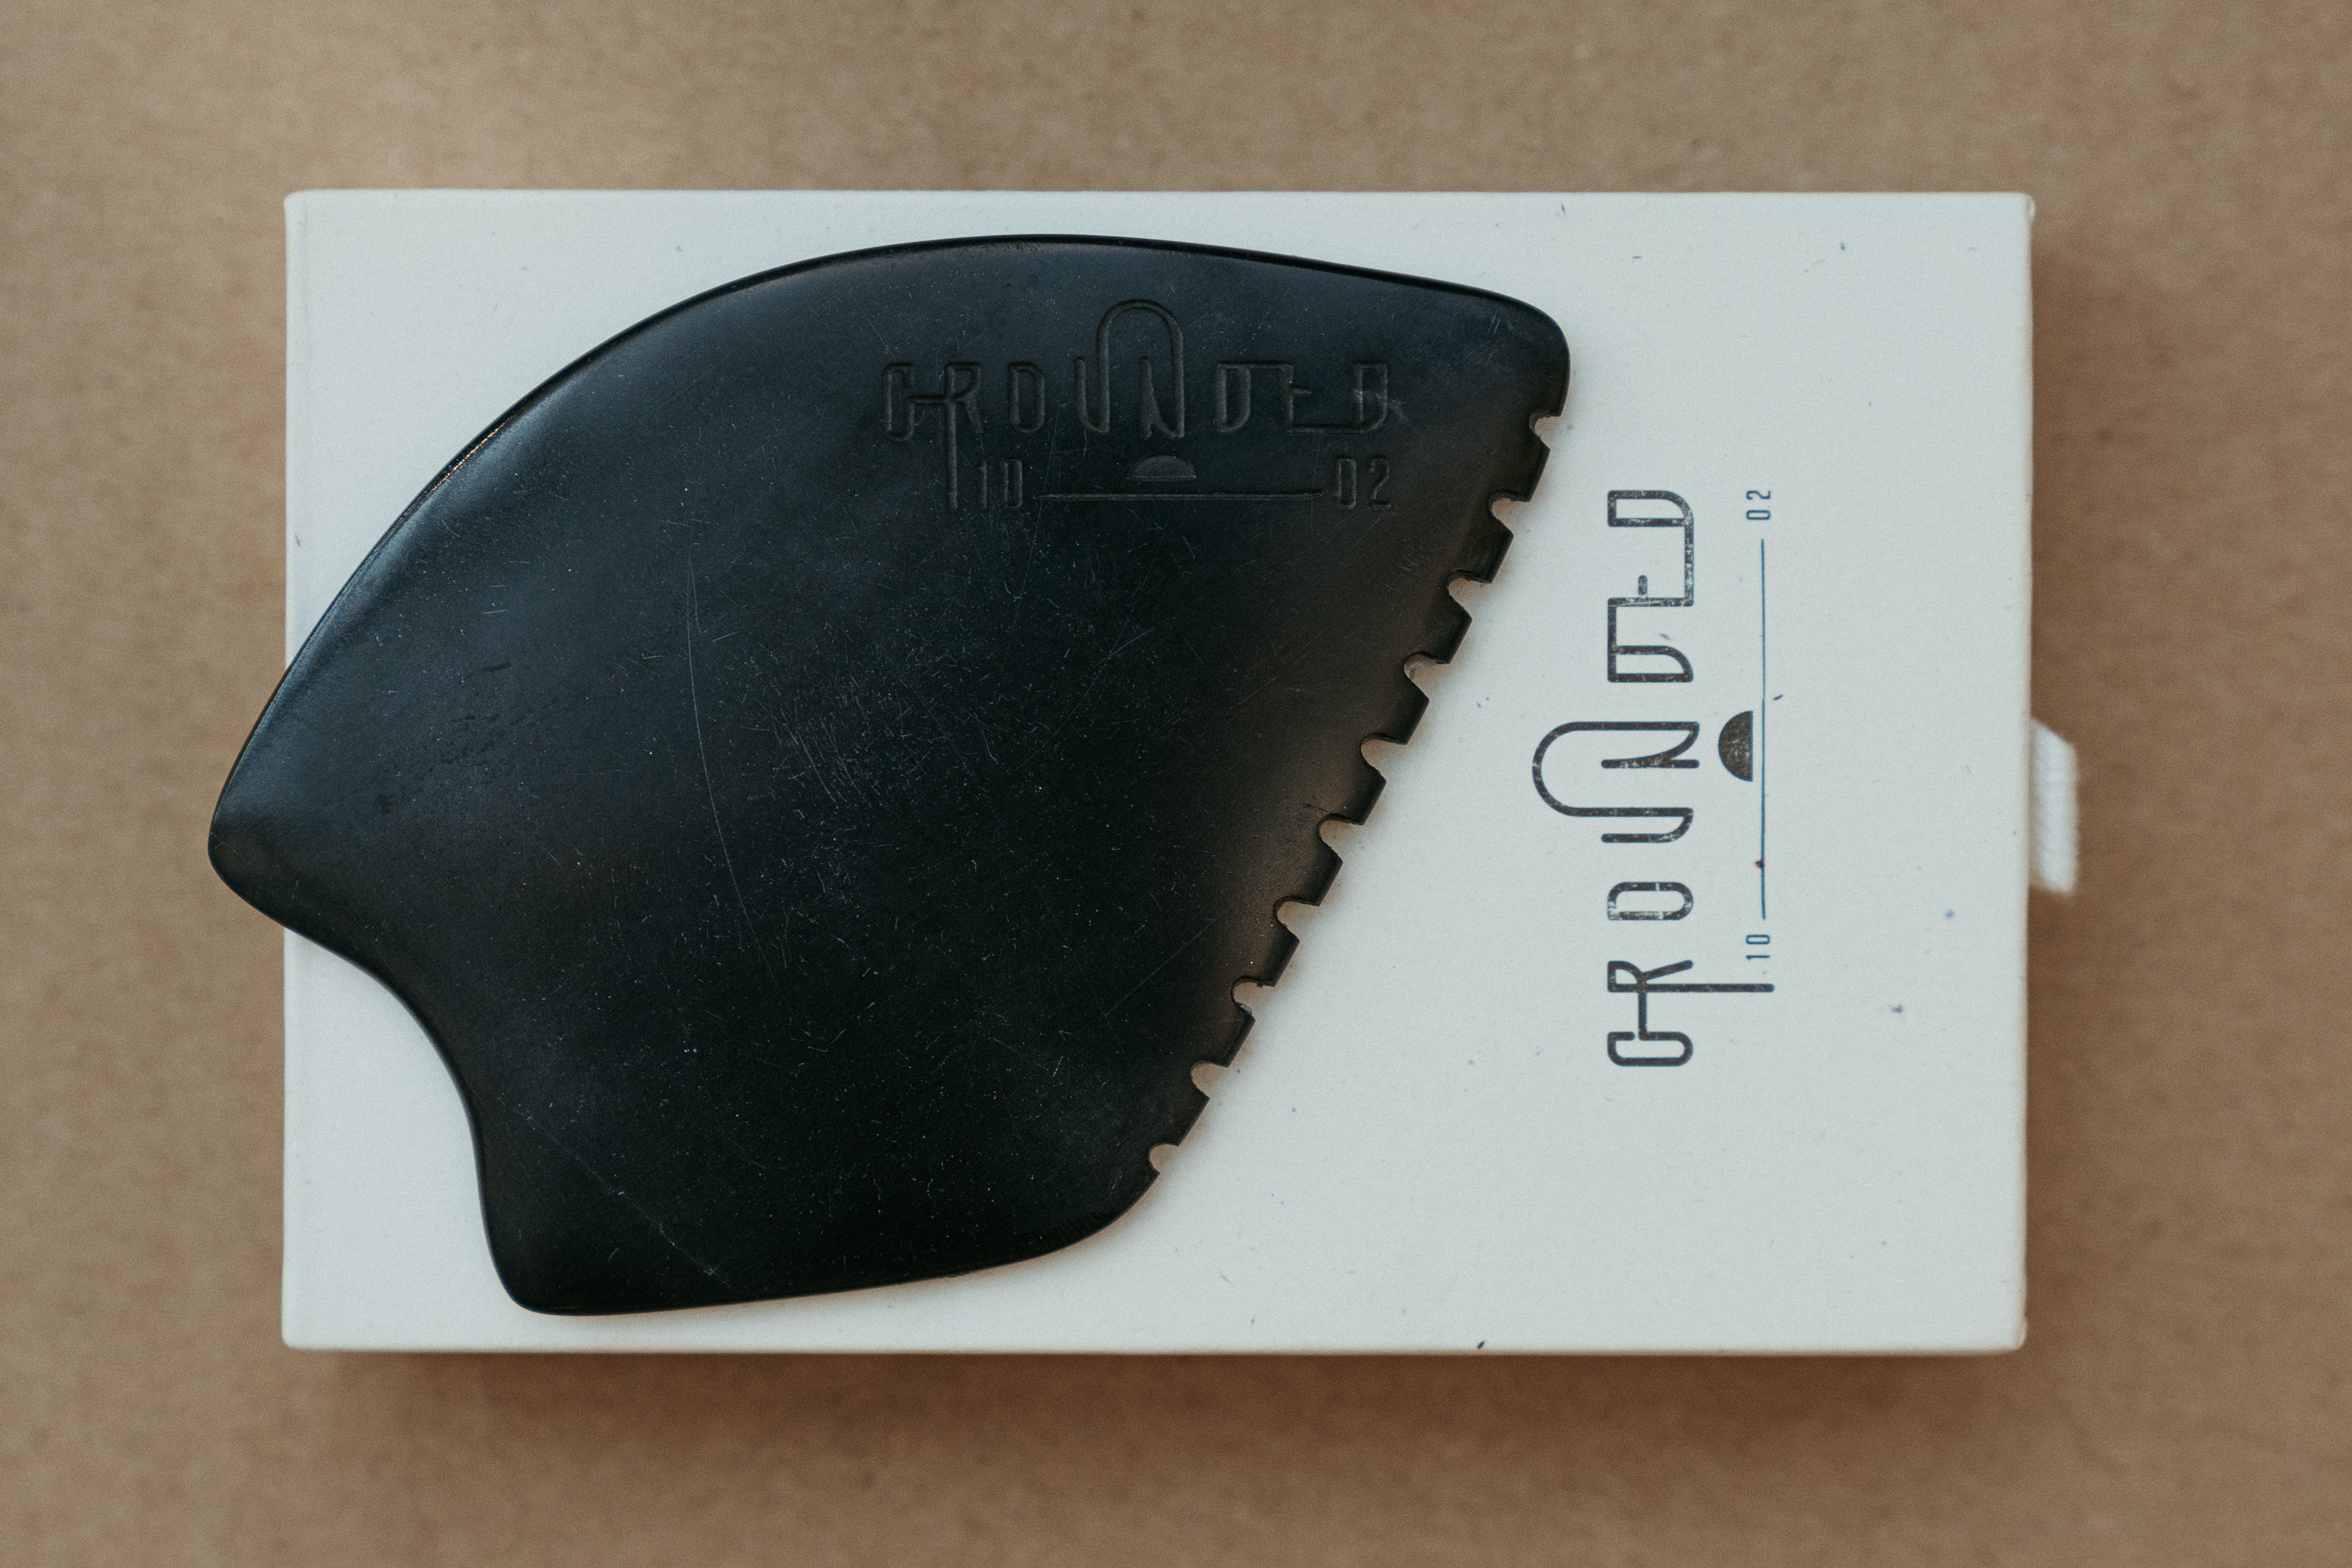 a palm sized black guasha tool (made from volcanic and metero matter) shaped into an abstract shape with one side ridged. The brand logo is engraved with no colour (just etched).  The tool sitting on the drawer box it is sent in. 